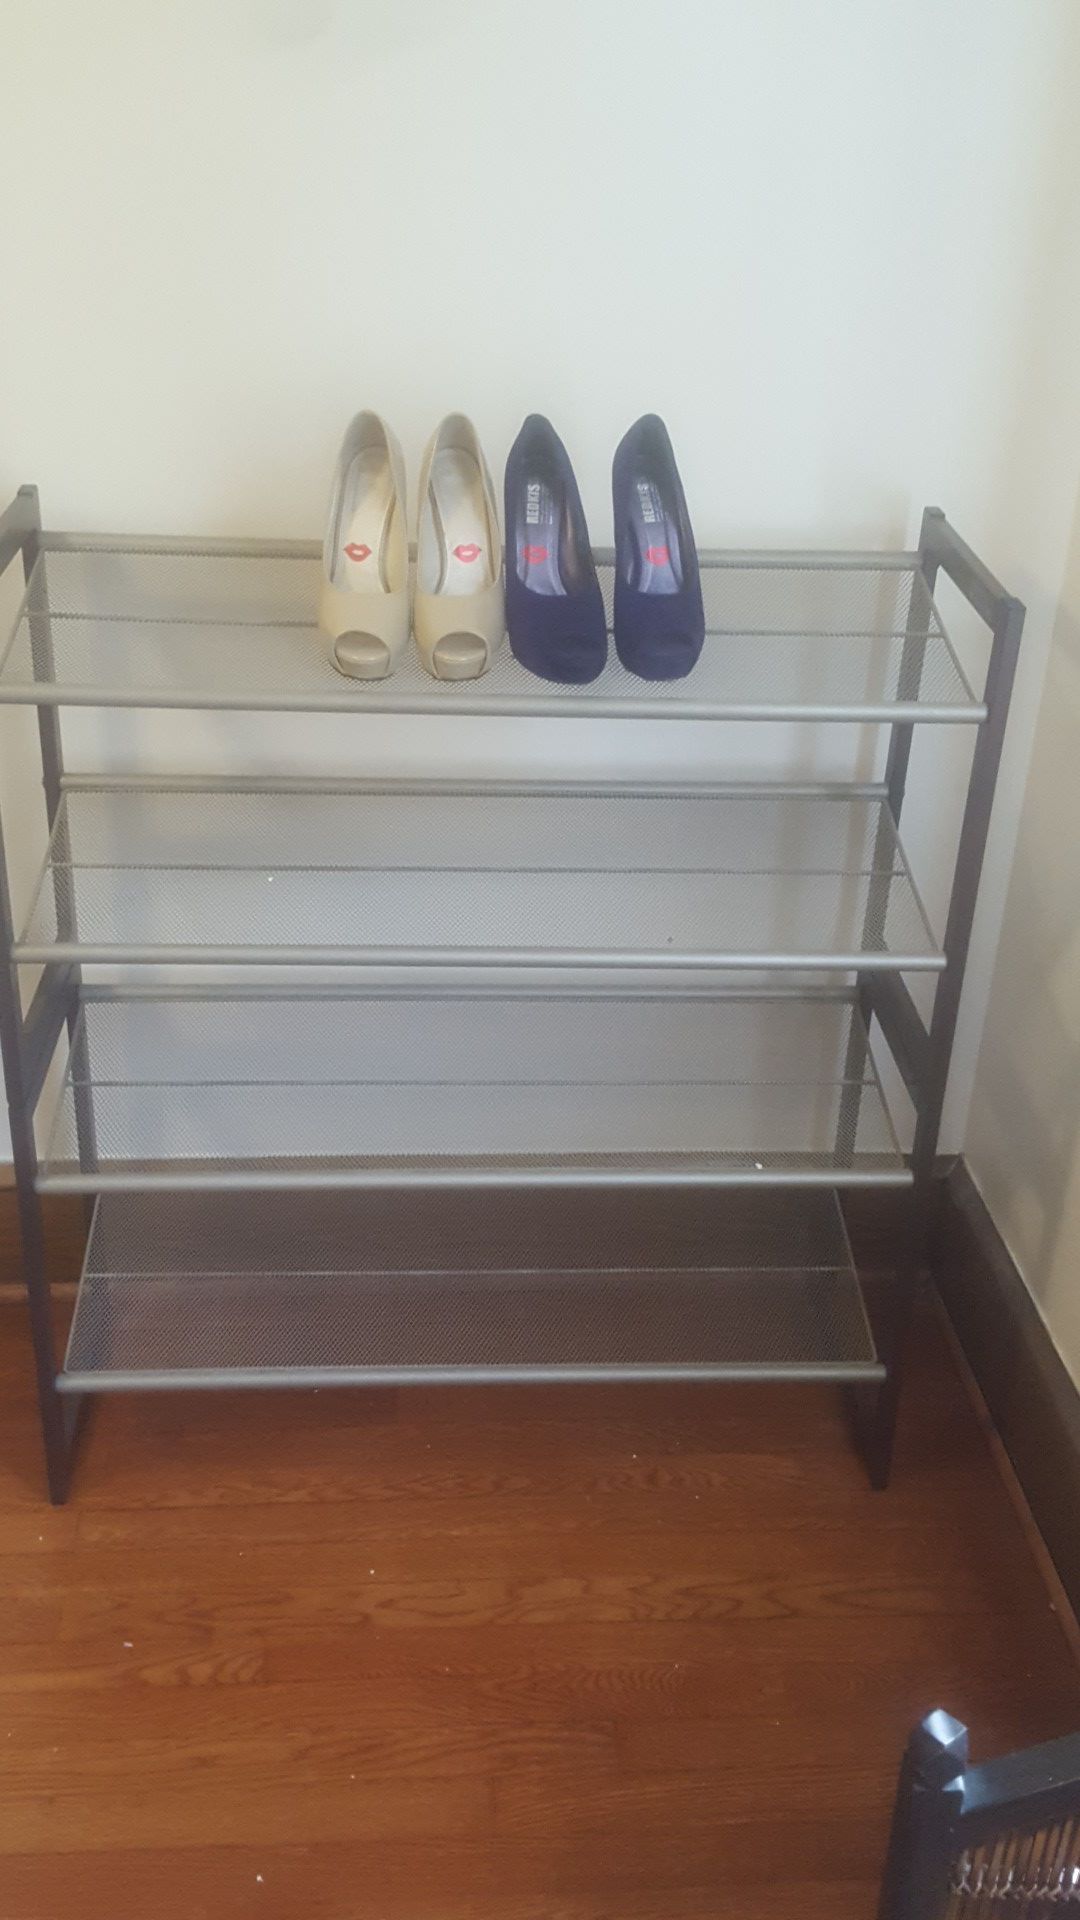 Shoe rack from Costco